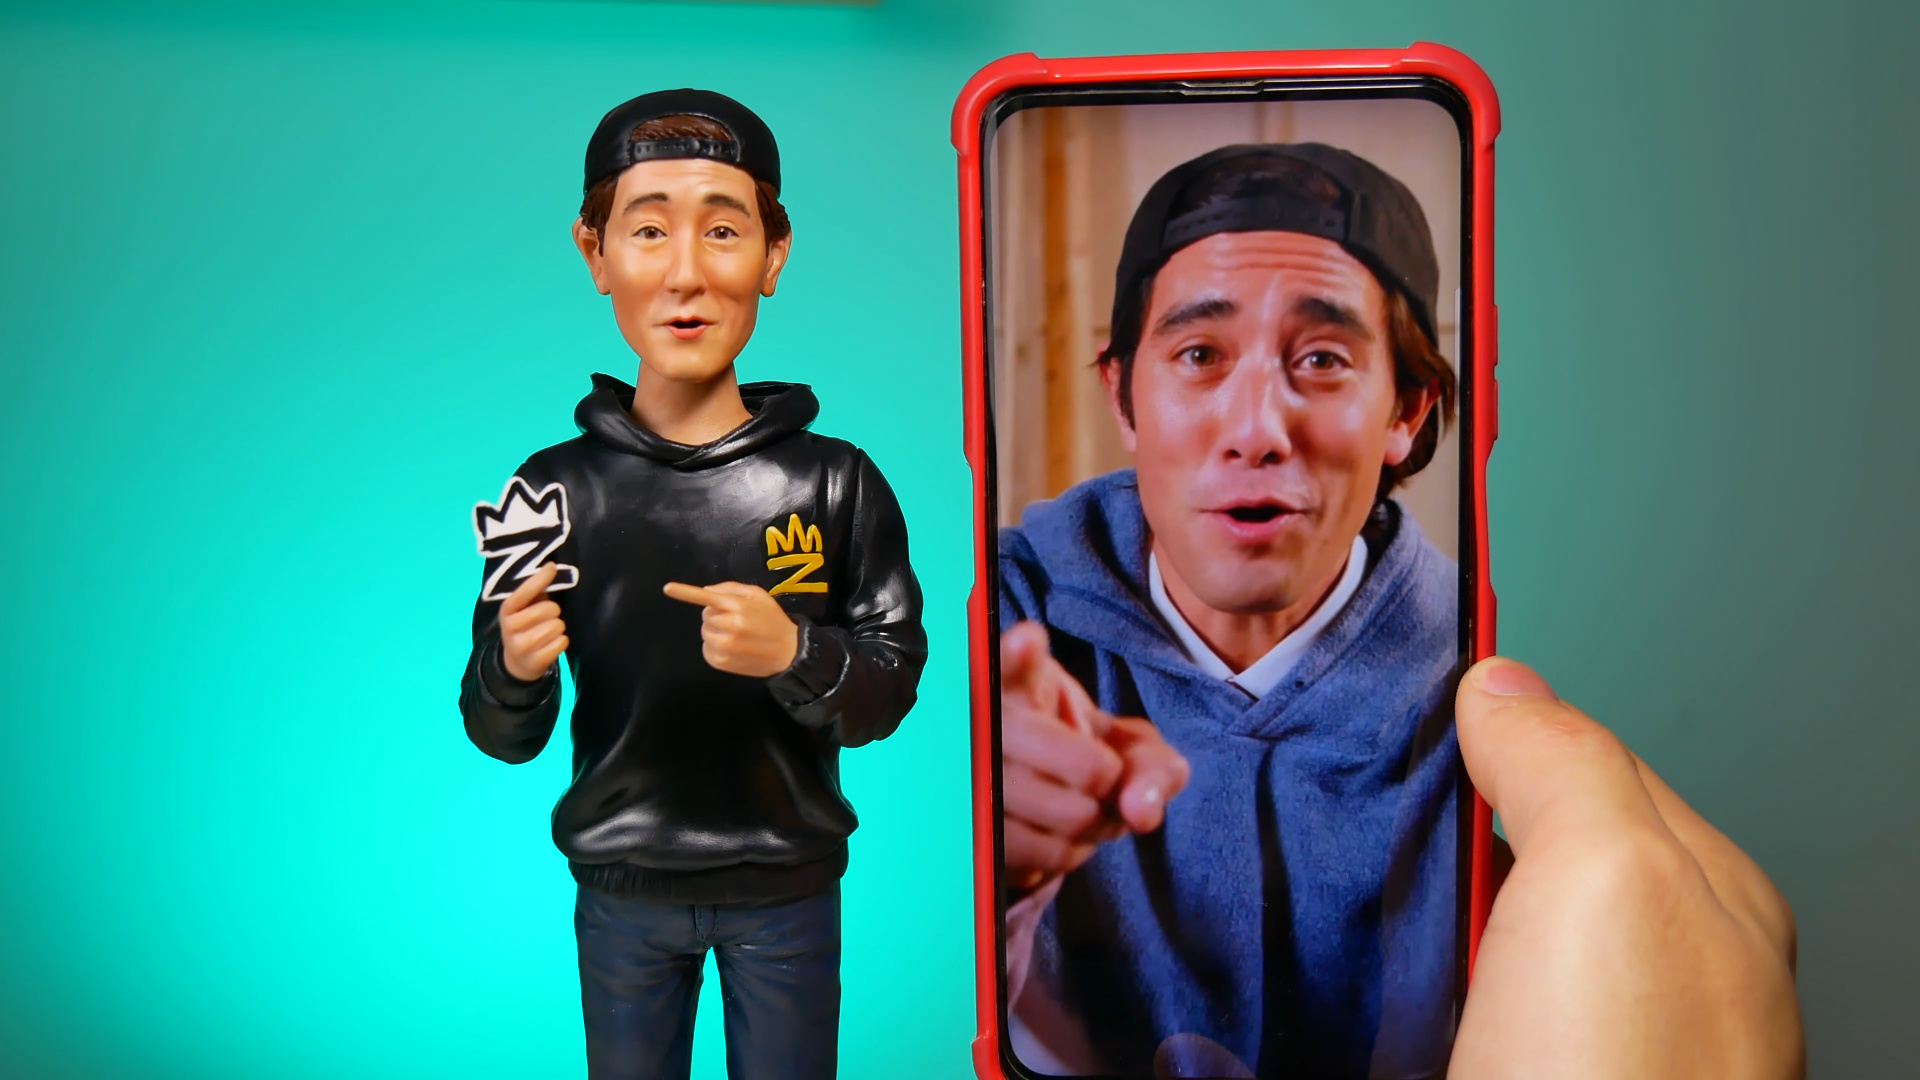 Zach King: Most known for his six-second videos digitally edited to look as if he is doing magic. 1920x1080 Full HD Wallpaper.